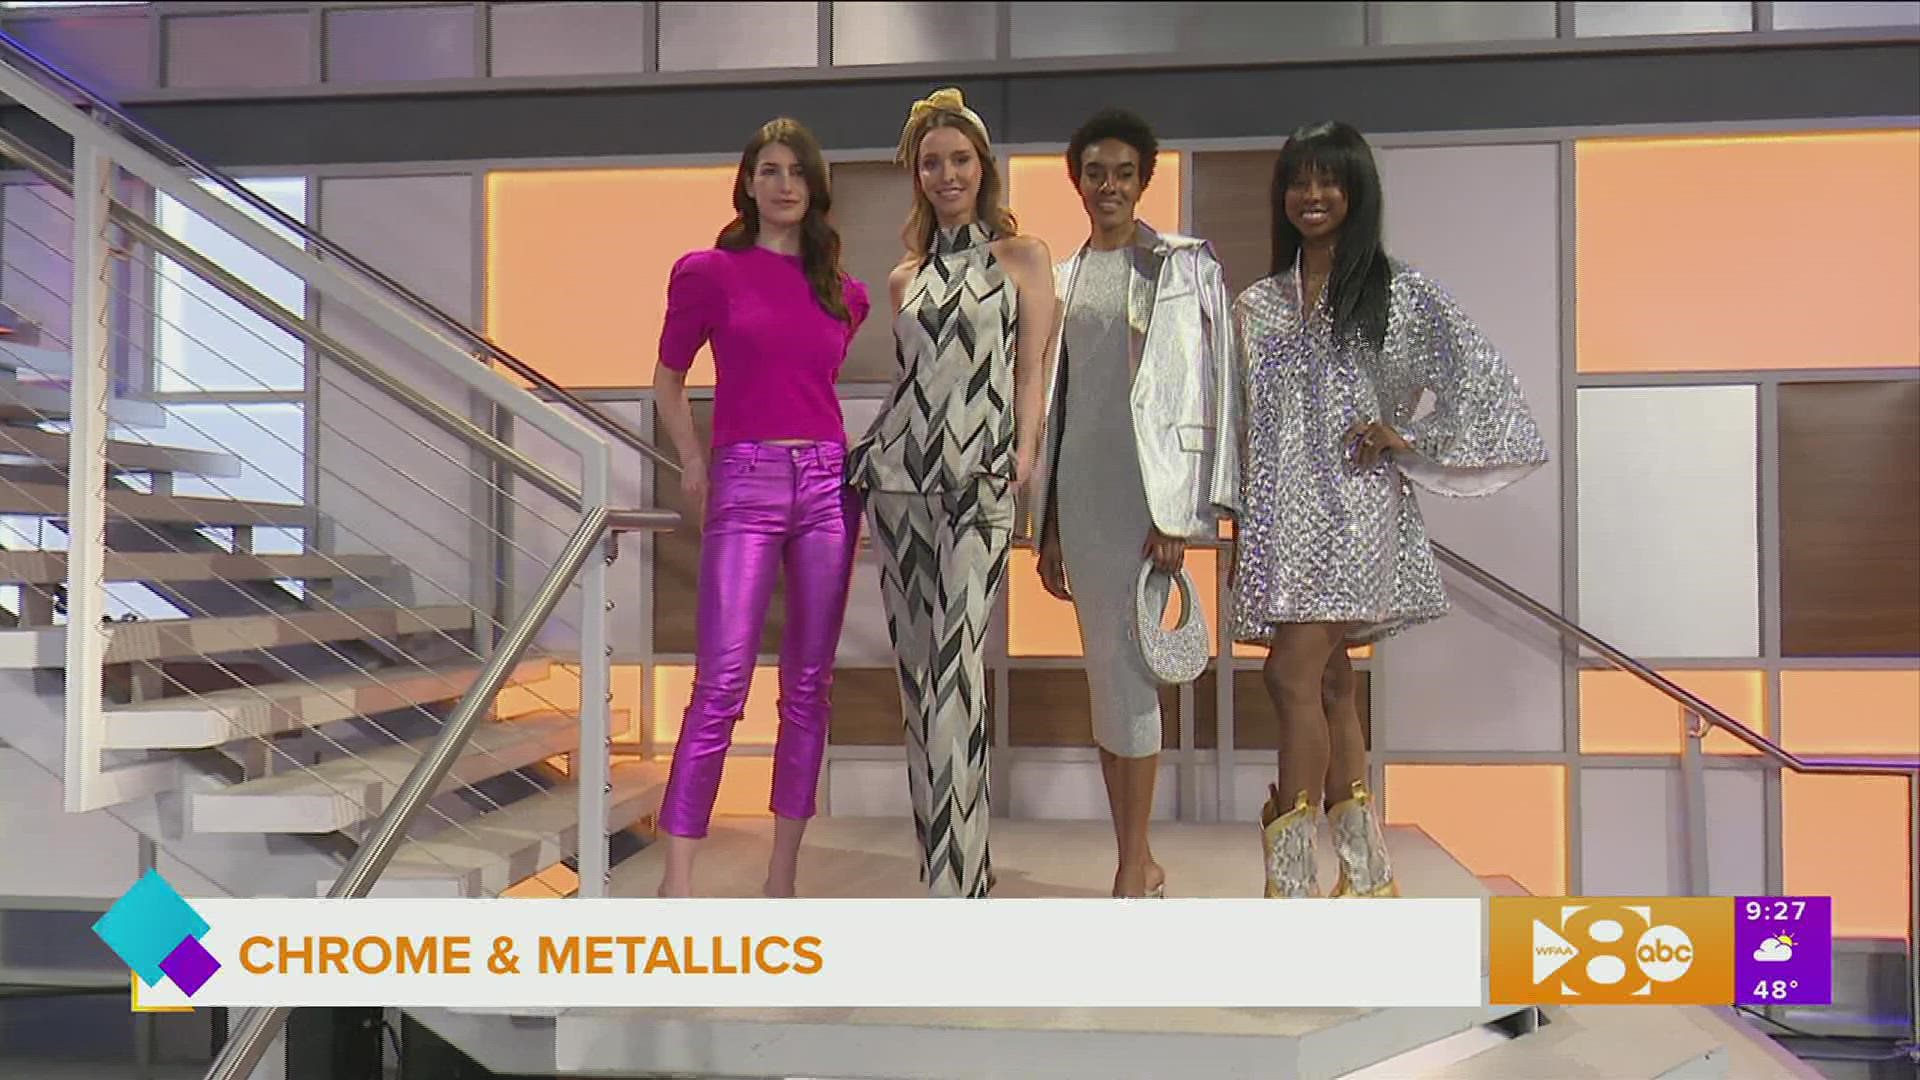 Victoria Snee shows us how to wear chrome and metallic fashions this year. Go to hpvillage.com for more information.